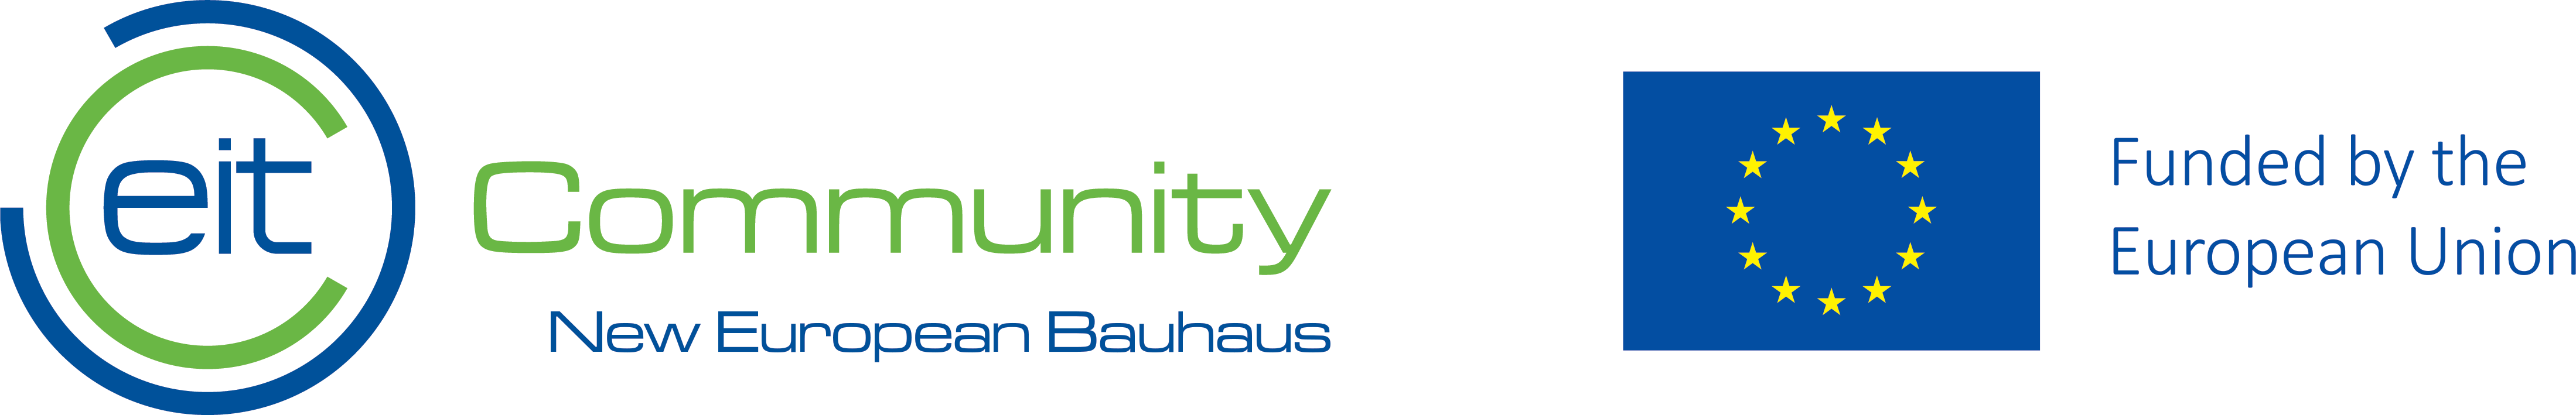 EIT Community New European Bauhaus. Funded by the European Union.